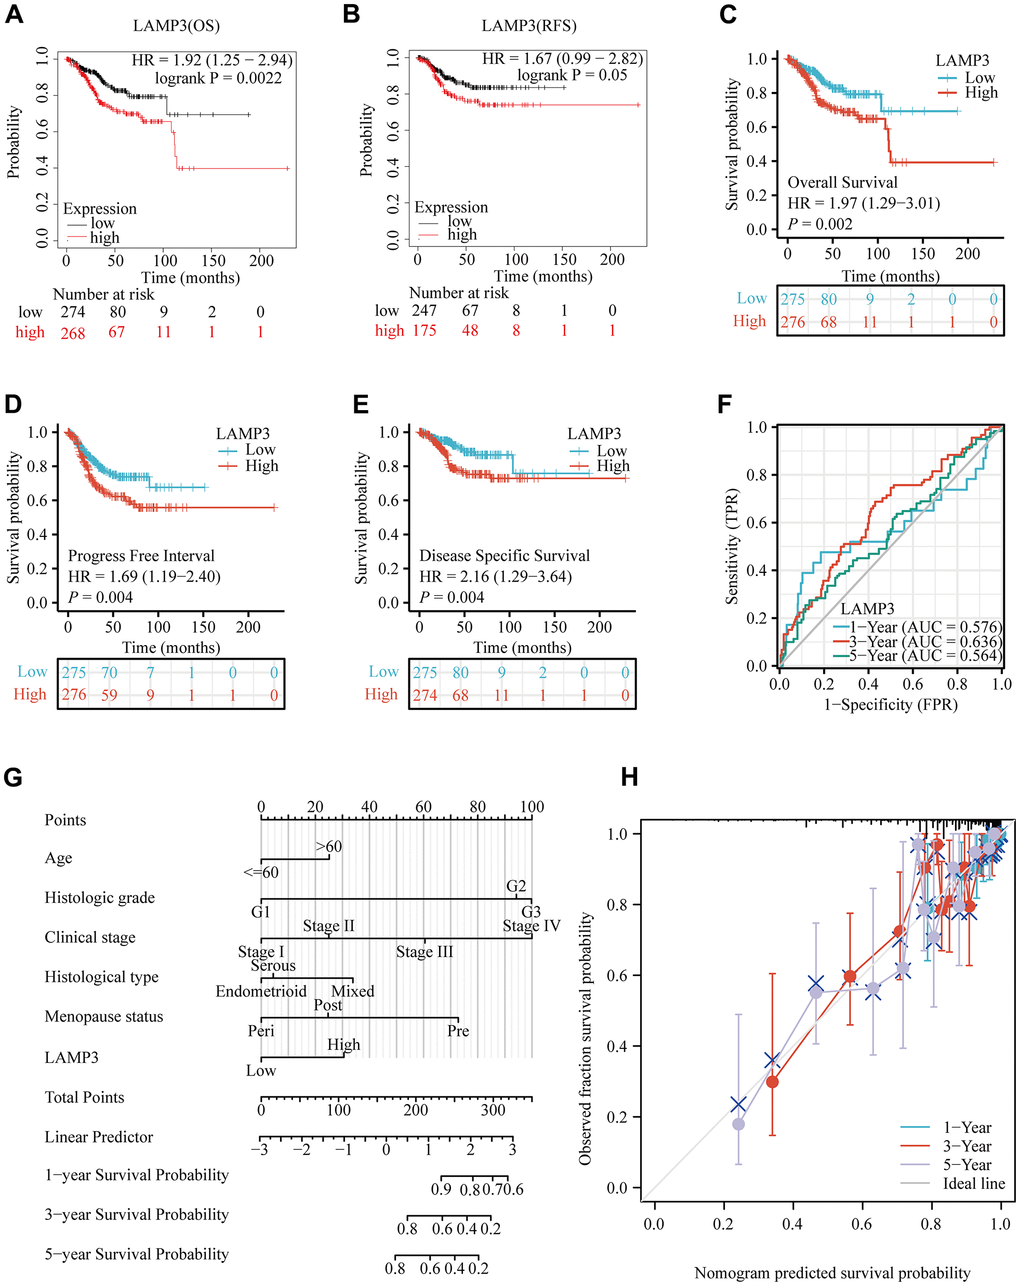 Prognostic value of LAMP3 in UCEC patients. (A, B) Demonstration of the relationship between LAMP3 expression and survival of UCEC patients on the basis of Kaplan-Meier plotter database. (C) Overall survival, (D) Progress free interval, (E) Disease specific survival of LAMP3 in UCEC with TCGA data. (F) A time-independent ROC curve demonstrates the predictive power of LAMP3. (G) A column line graph presents the impact of clinical features and LAMP3 expression on the prognosis of UCEC patients. (H) Calibration curve of the column line graph.